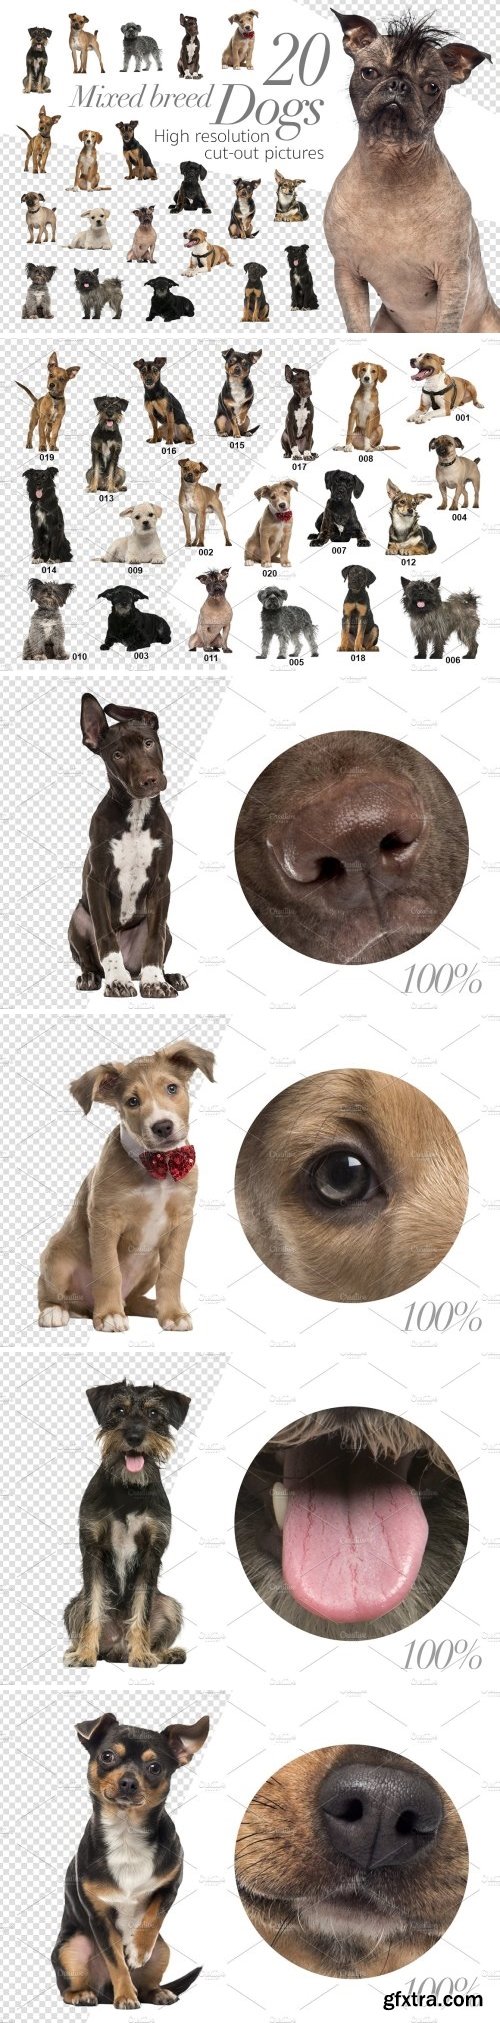 CM - 20 Mixed breed Dogs - Cut-out Pics 2029733